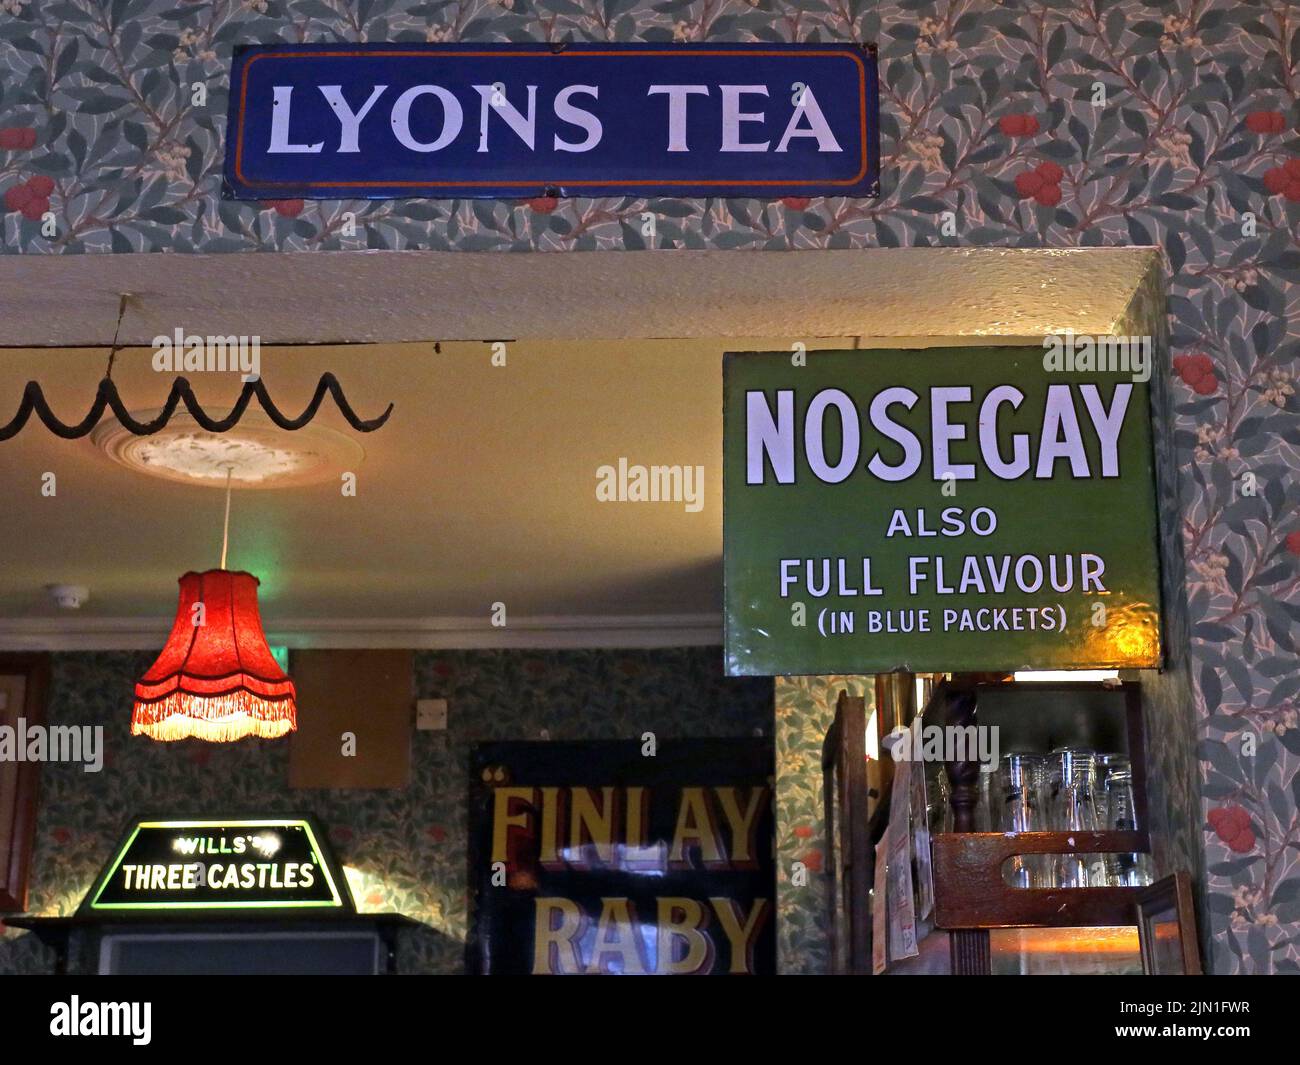 Adverts for Lyons Tea, Nosegay also full flavour, Wills, Interior of The Albion Inn, Volunteer St / Park St, Chester, Cheshire, England, UK, CH1 1RN Stock Photo